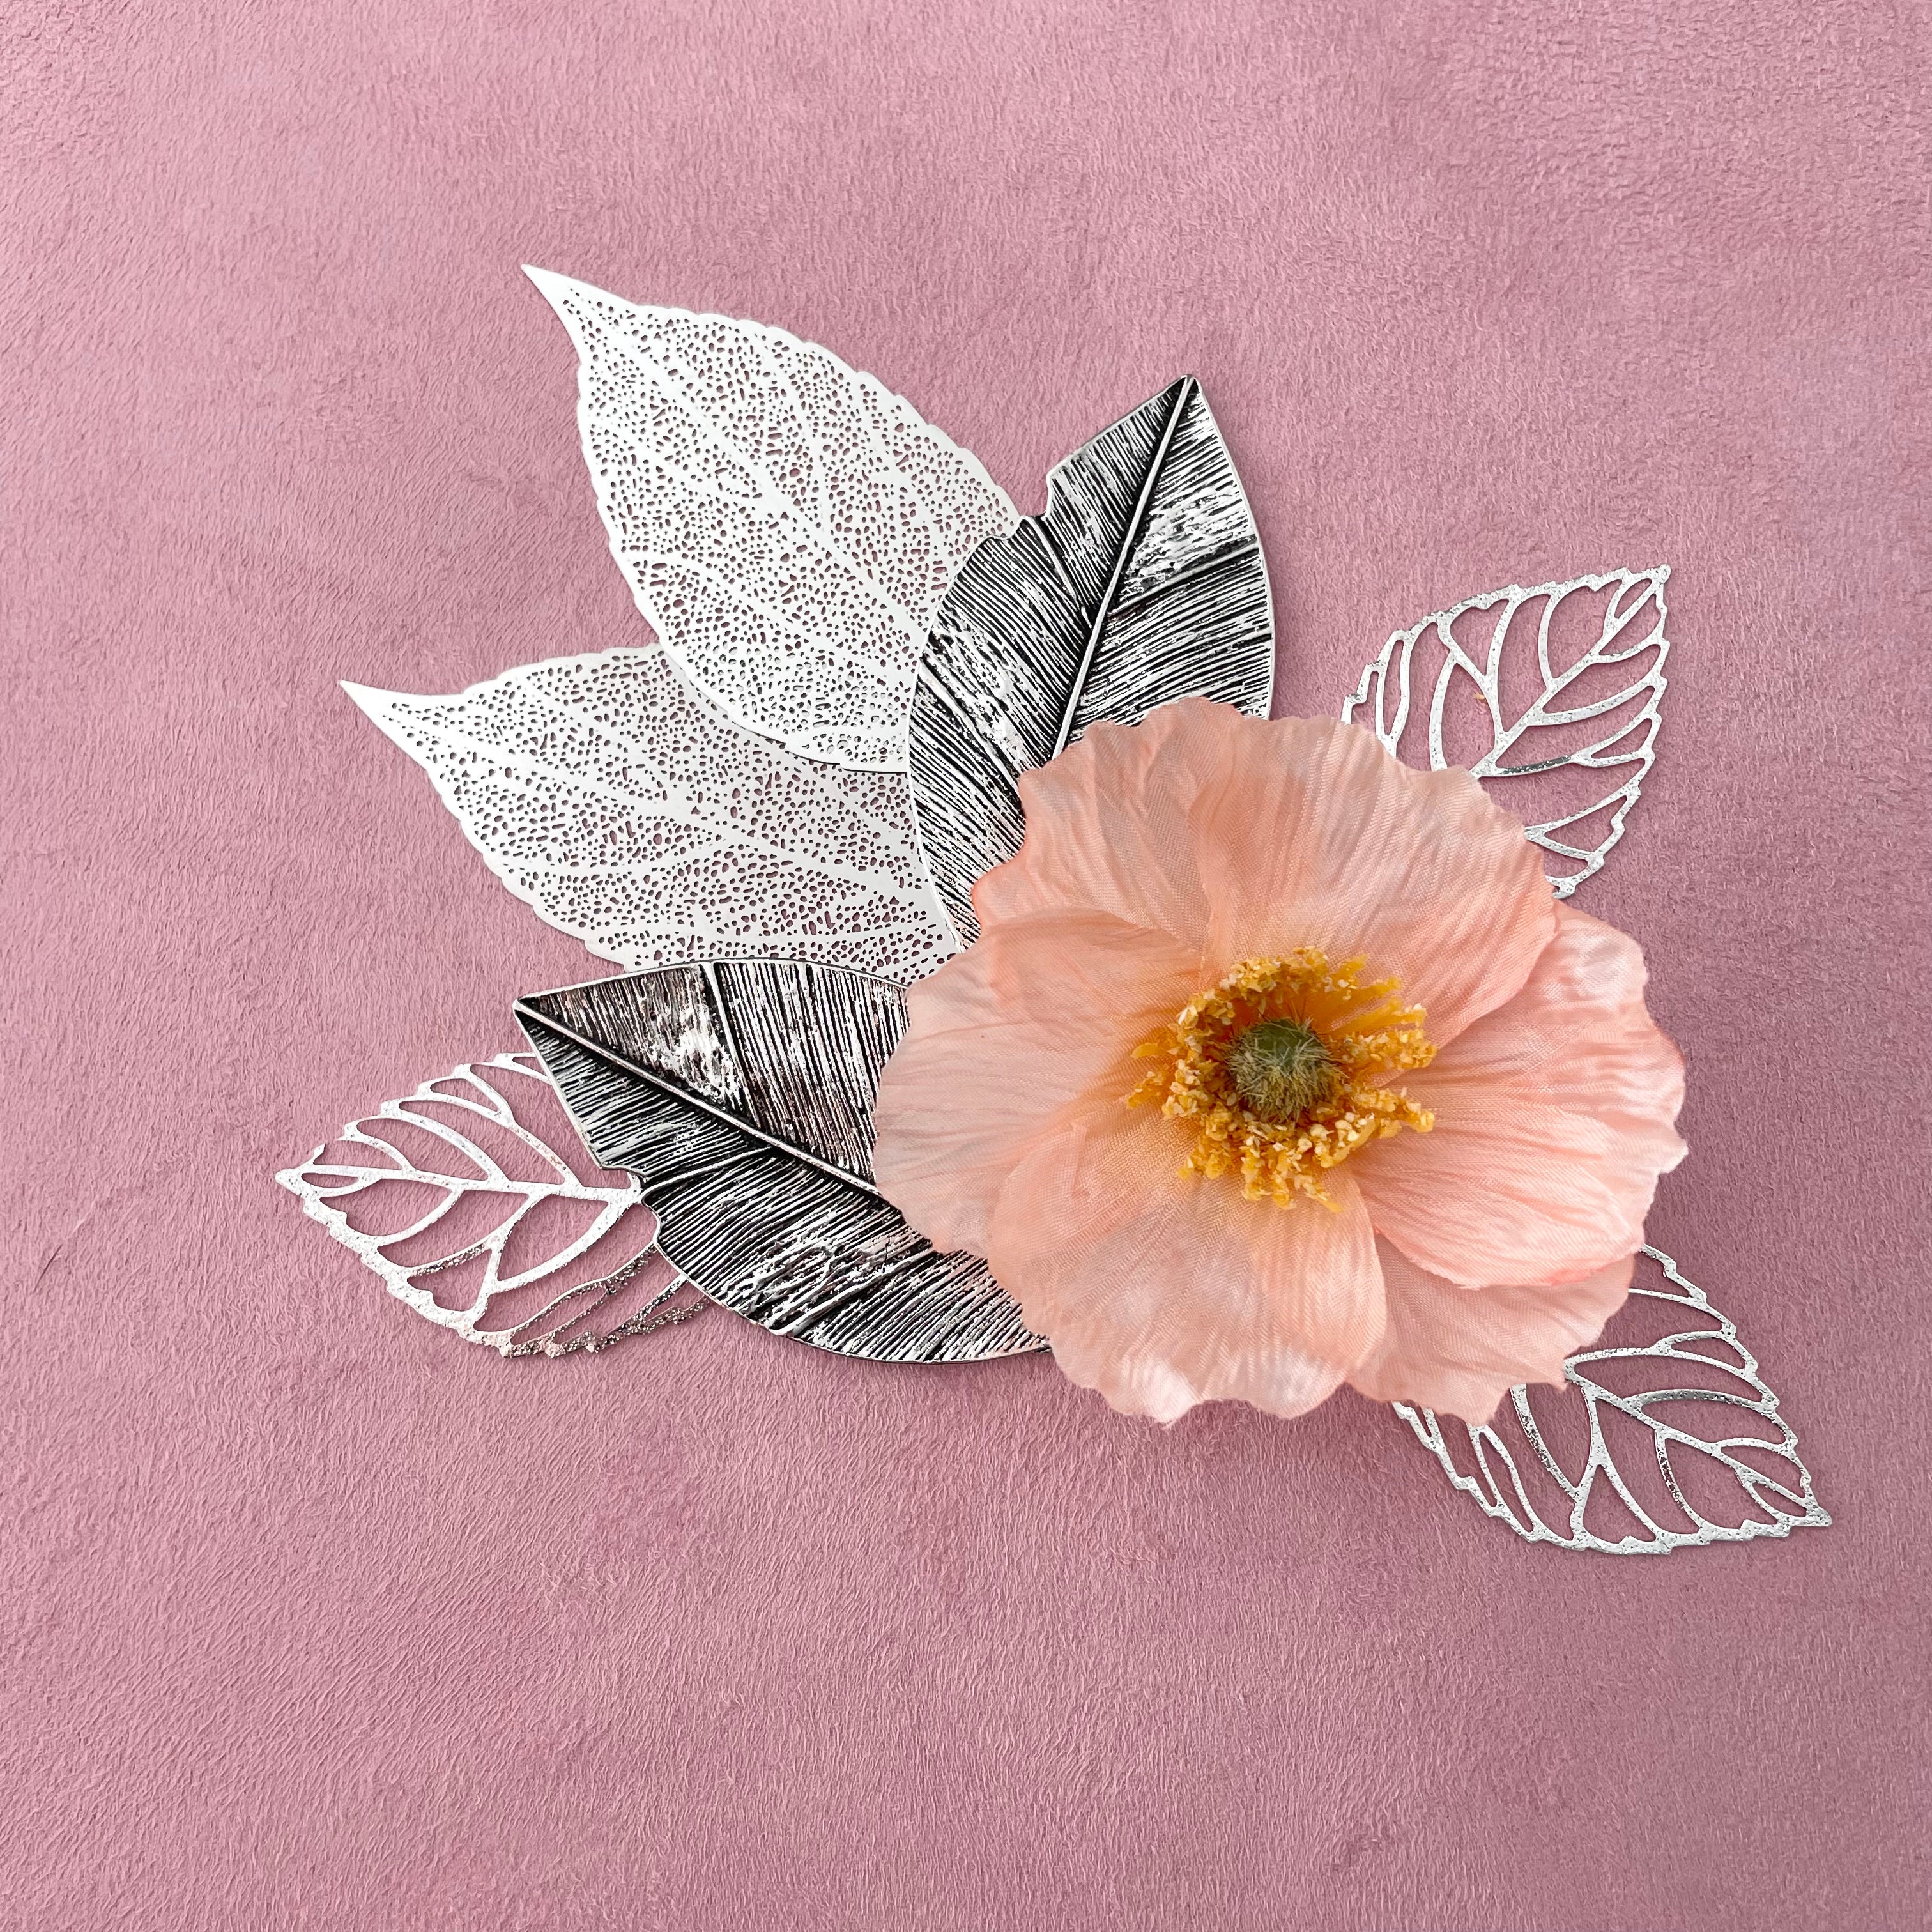 7 styling leaves including 3 silver leaves, 2 silver leaves that are larger, and 2 large silver with dark accent leaves with one flower on top - wedding flat lay props from Champagne & GRIT